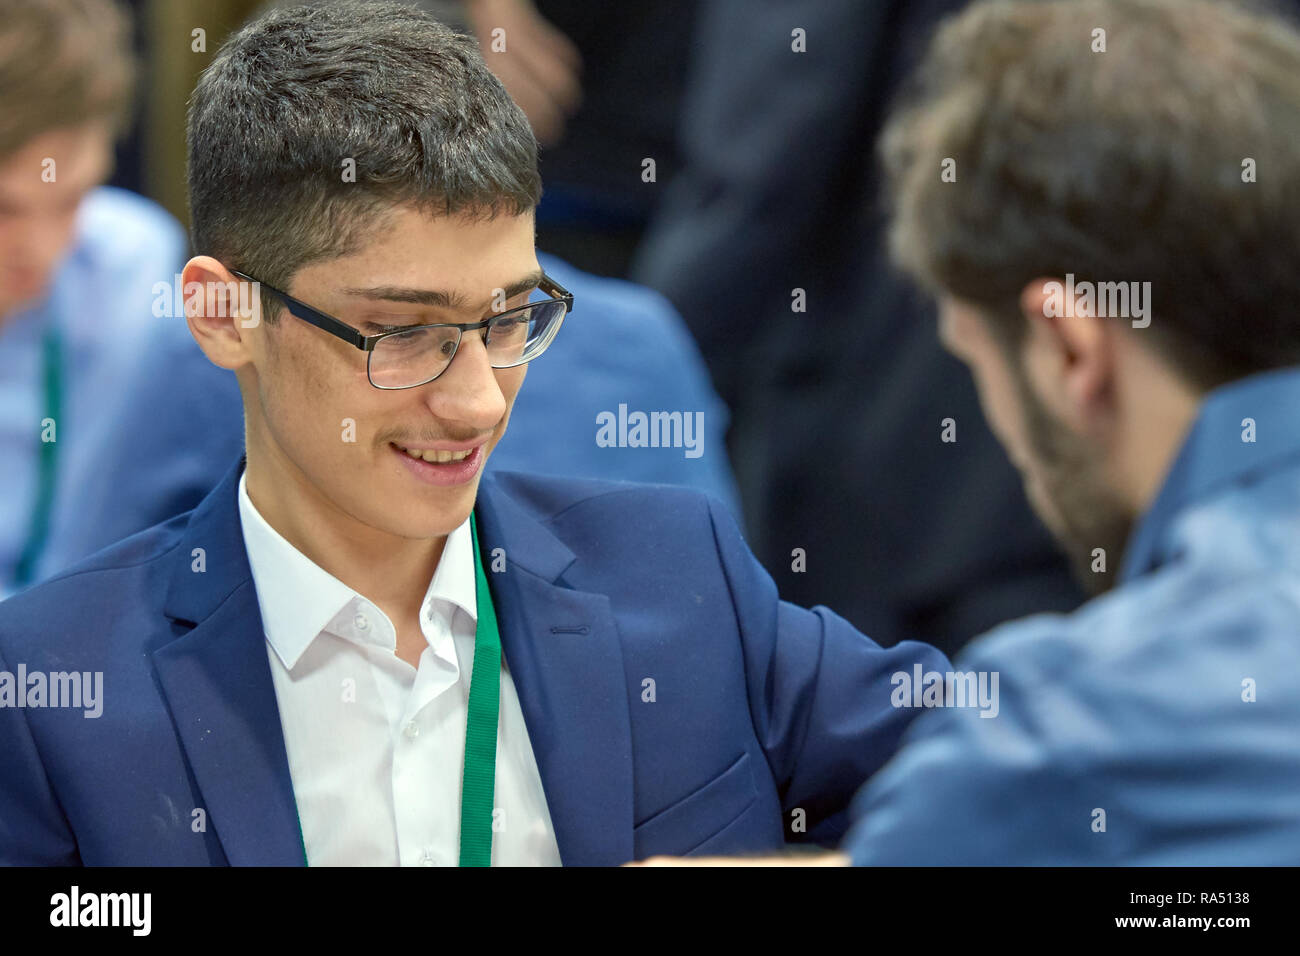 St. Petersburg, Russia - December 30, 2018: Grandmaster Daniil Dubov,  Russia holding the golden cup of World Rapid Chess Championship 2018 during  awar Stock Photo - Alamy